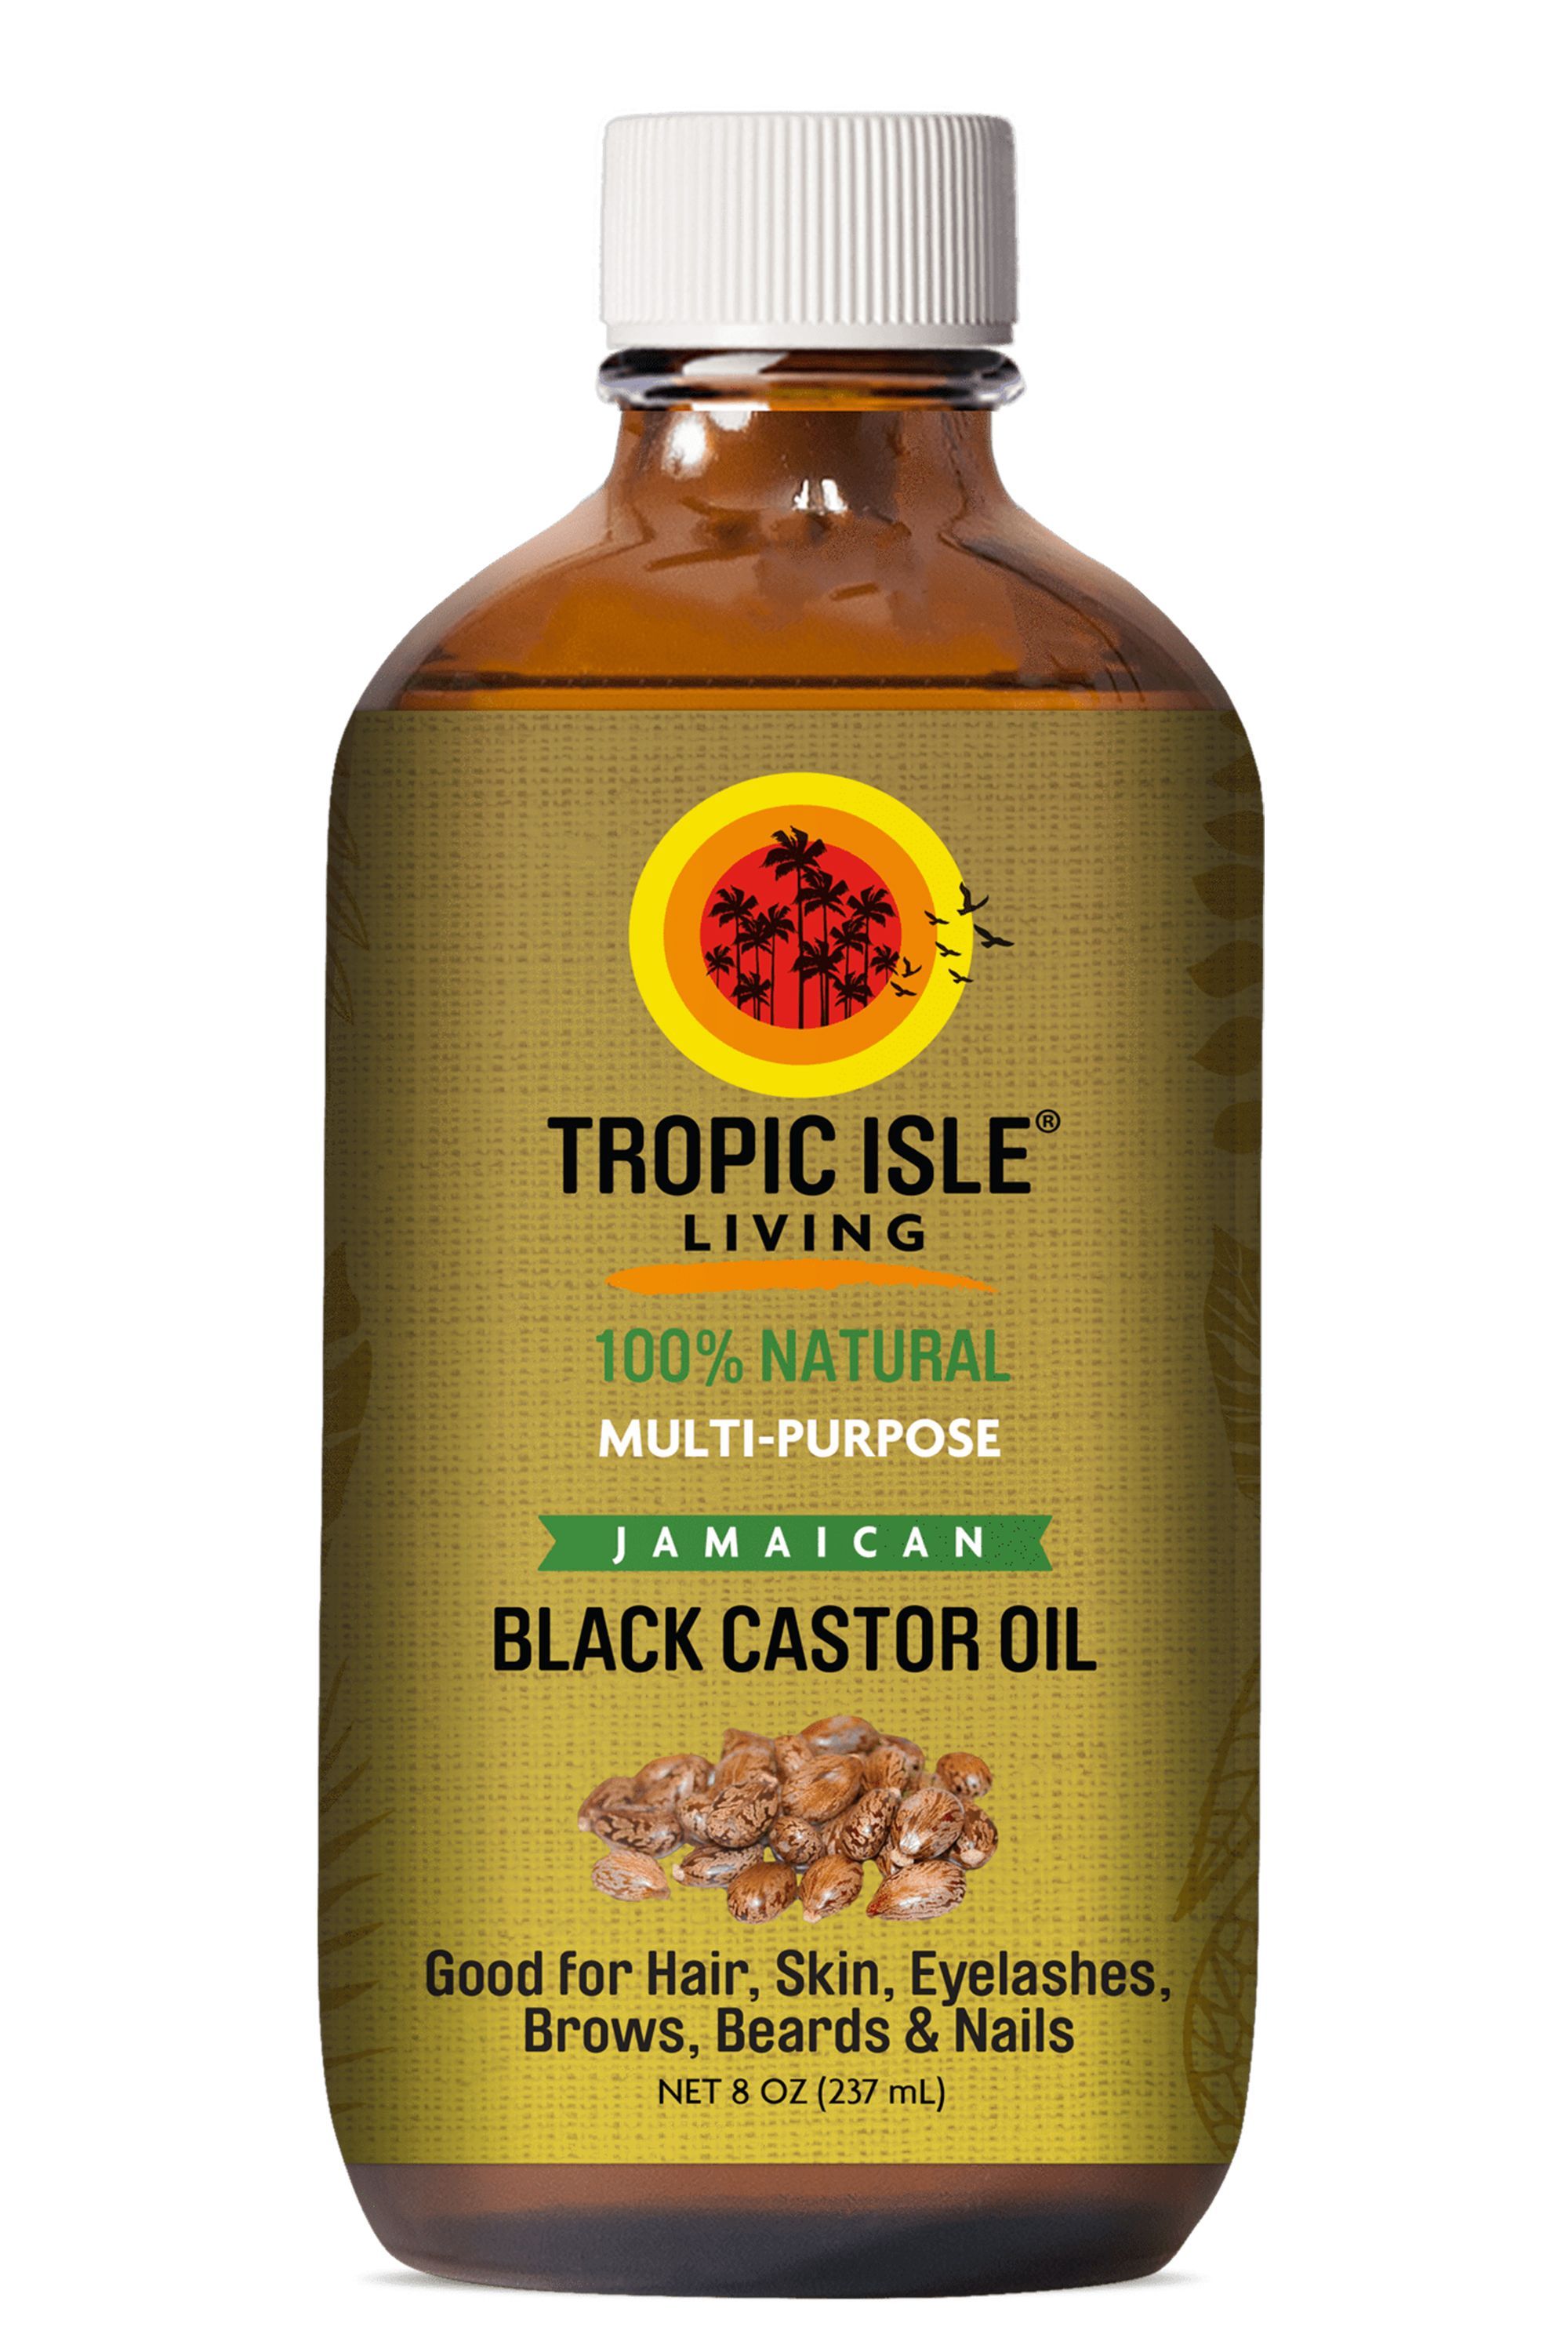 Does jamaican black castor oil make your hair fall out The Benefits And Uses Of Castor Oil For Hair Growth